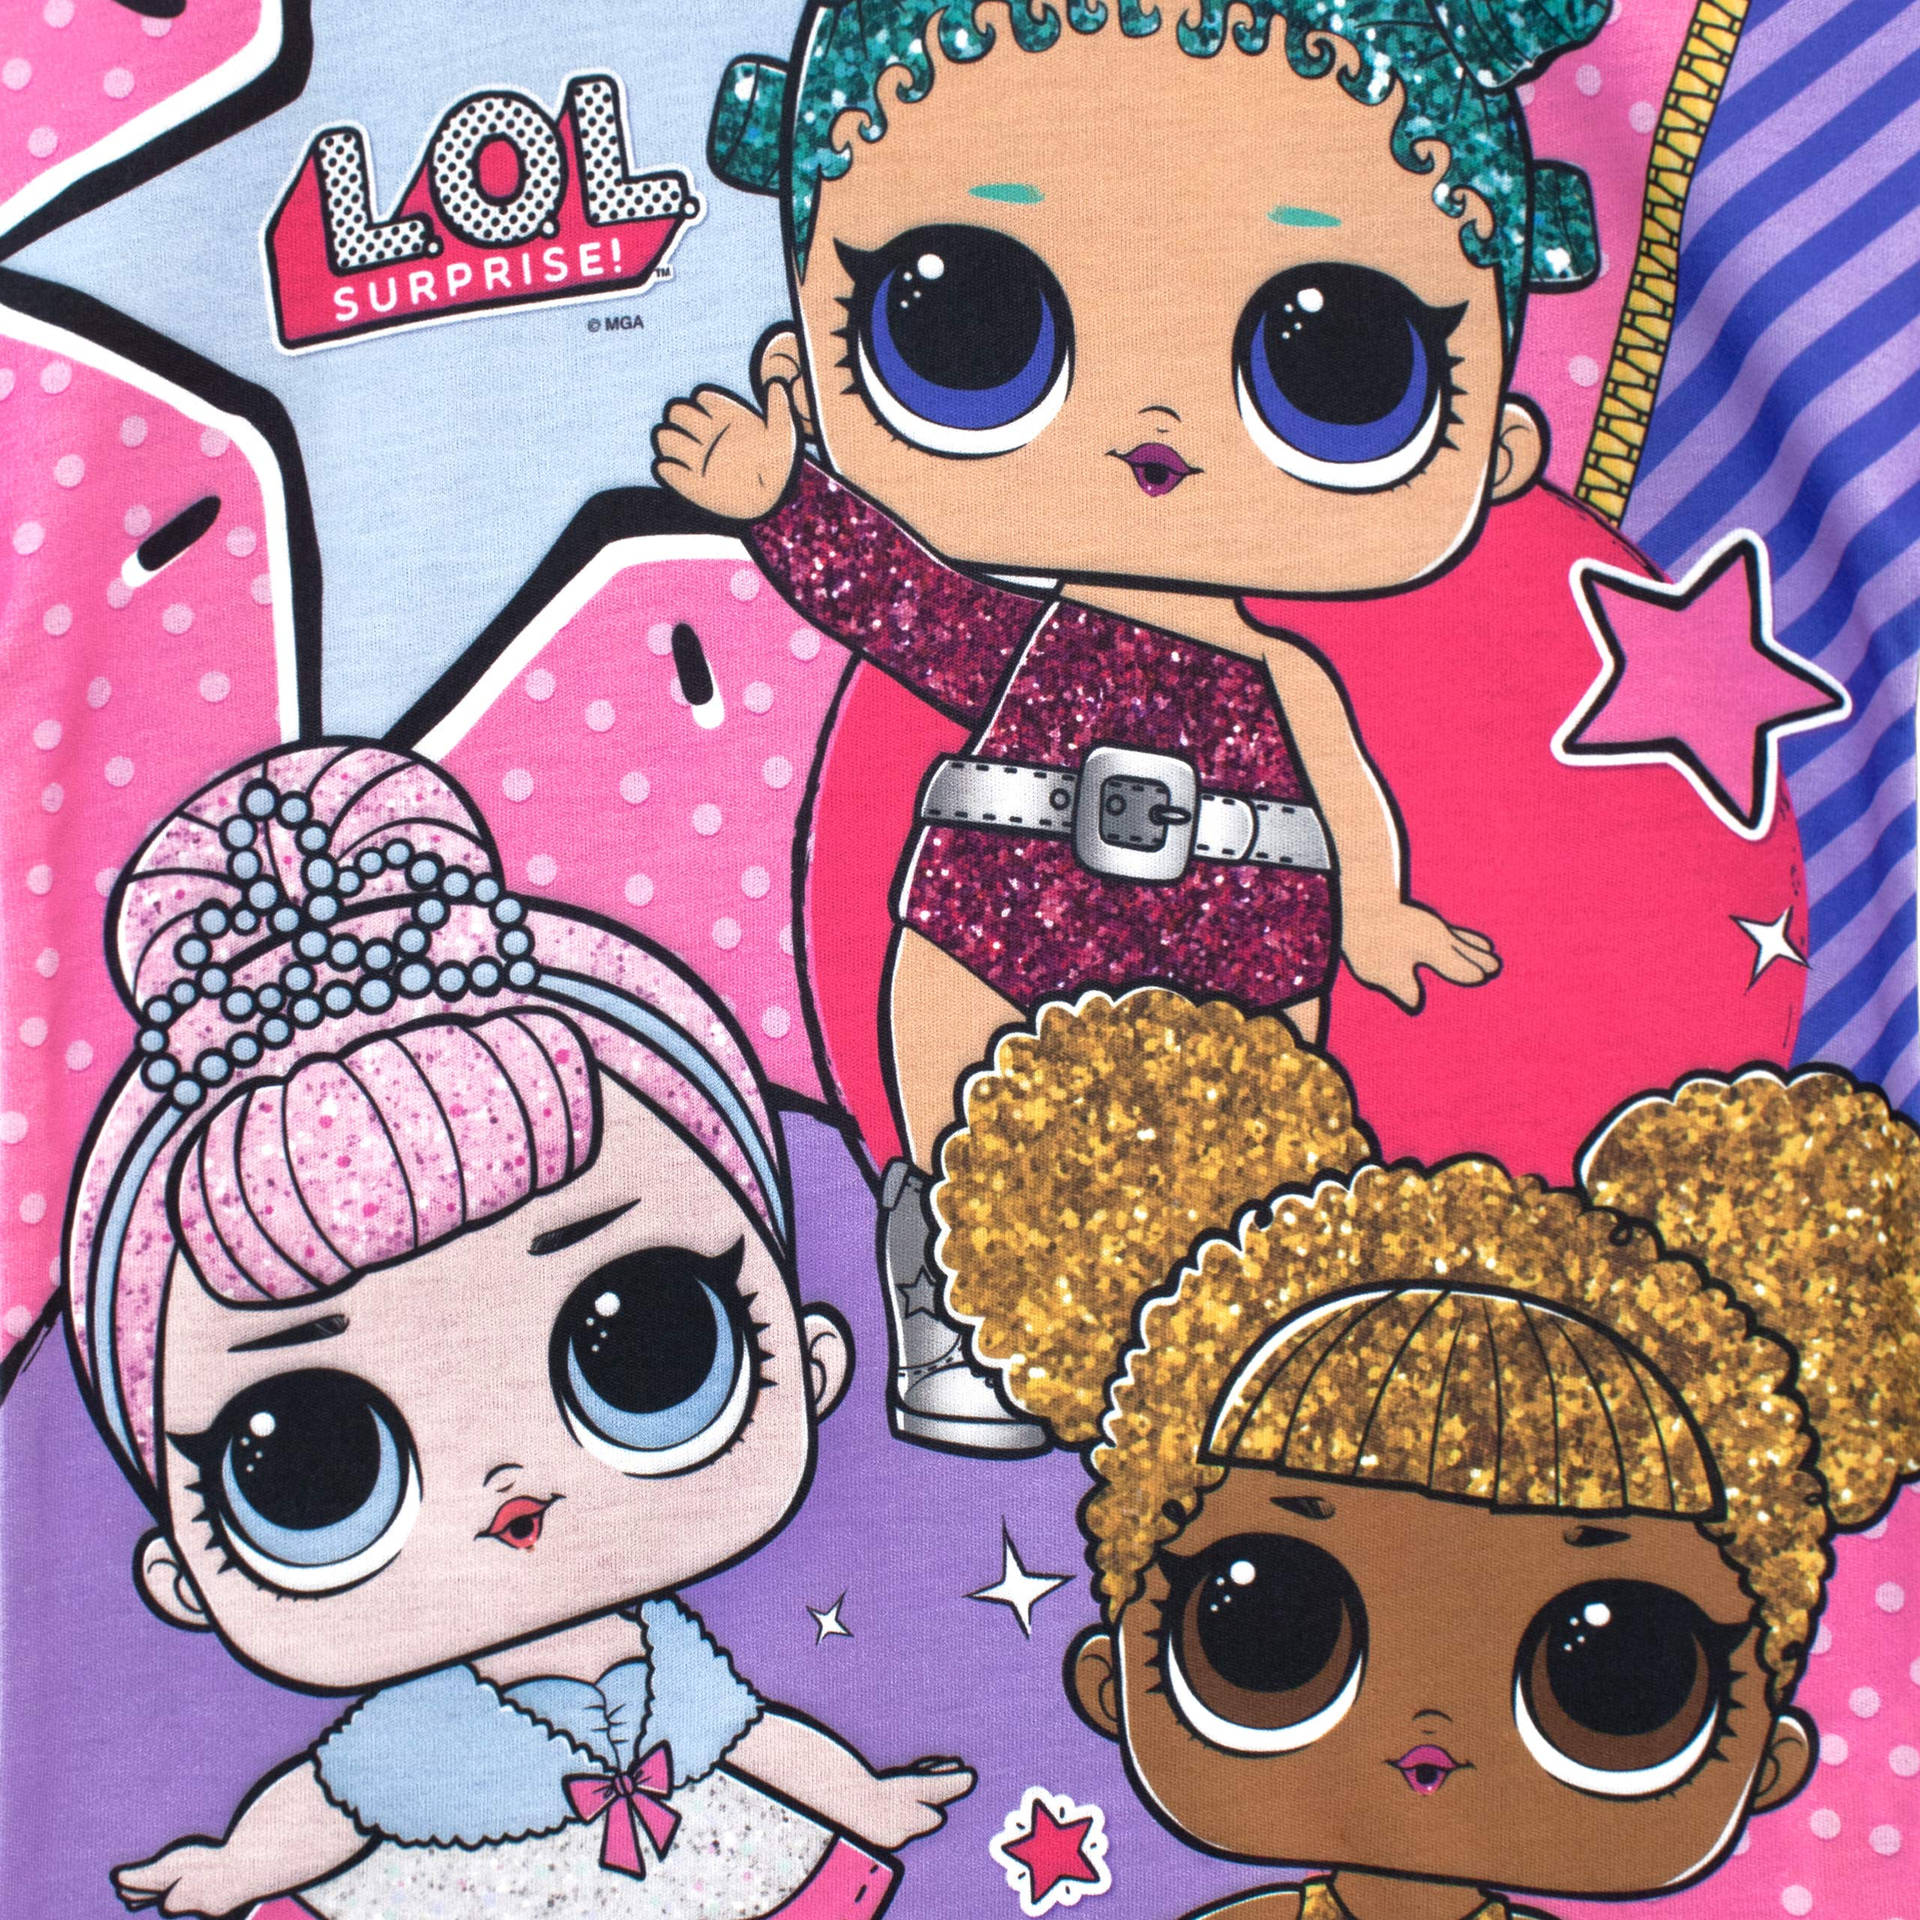 Join The Lol Dolls In Their World Of Adventure!